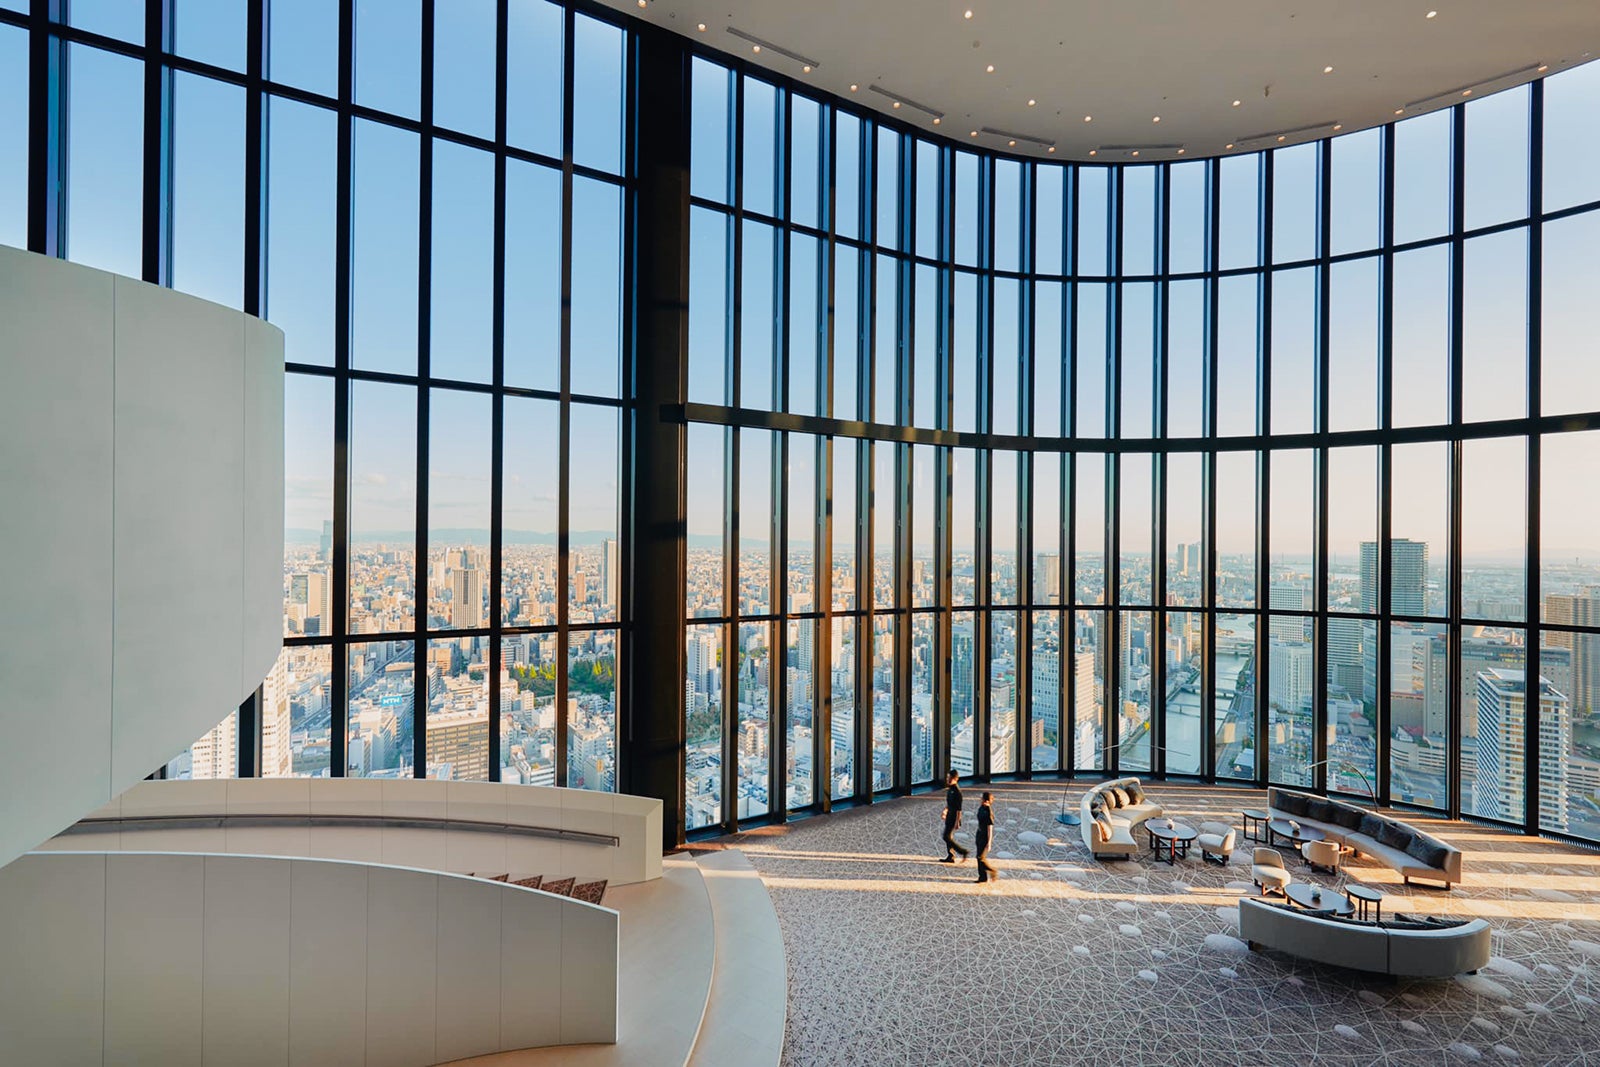 Sky-high views and sultyy vibes: A overview of the Conrad Osaka